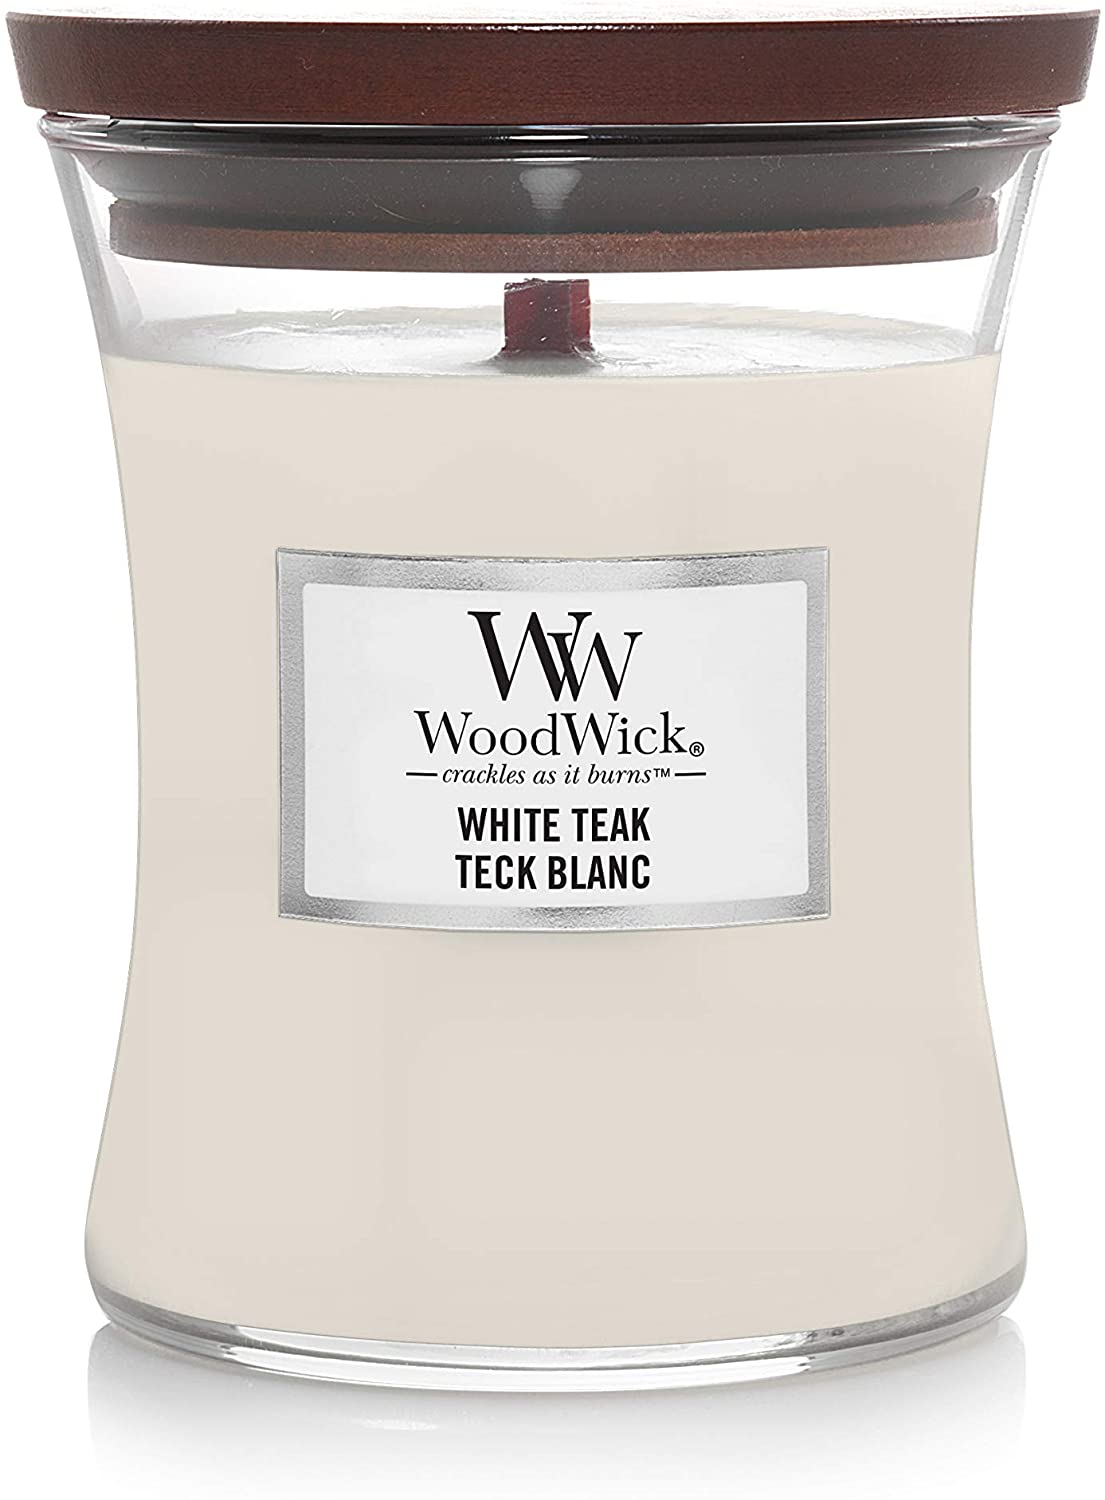 Woodwick Elliptical Scented Candle With Crackling Wick